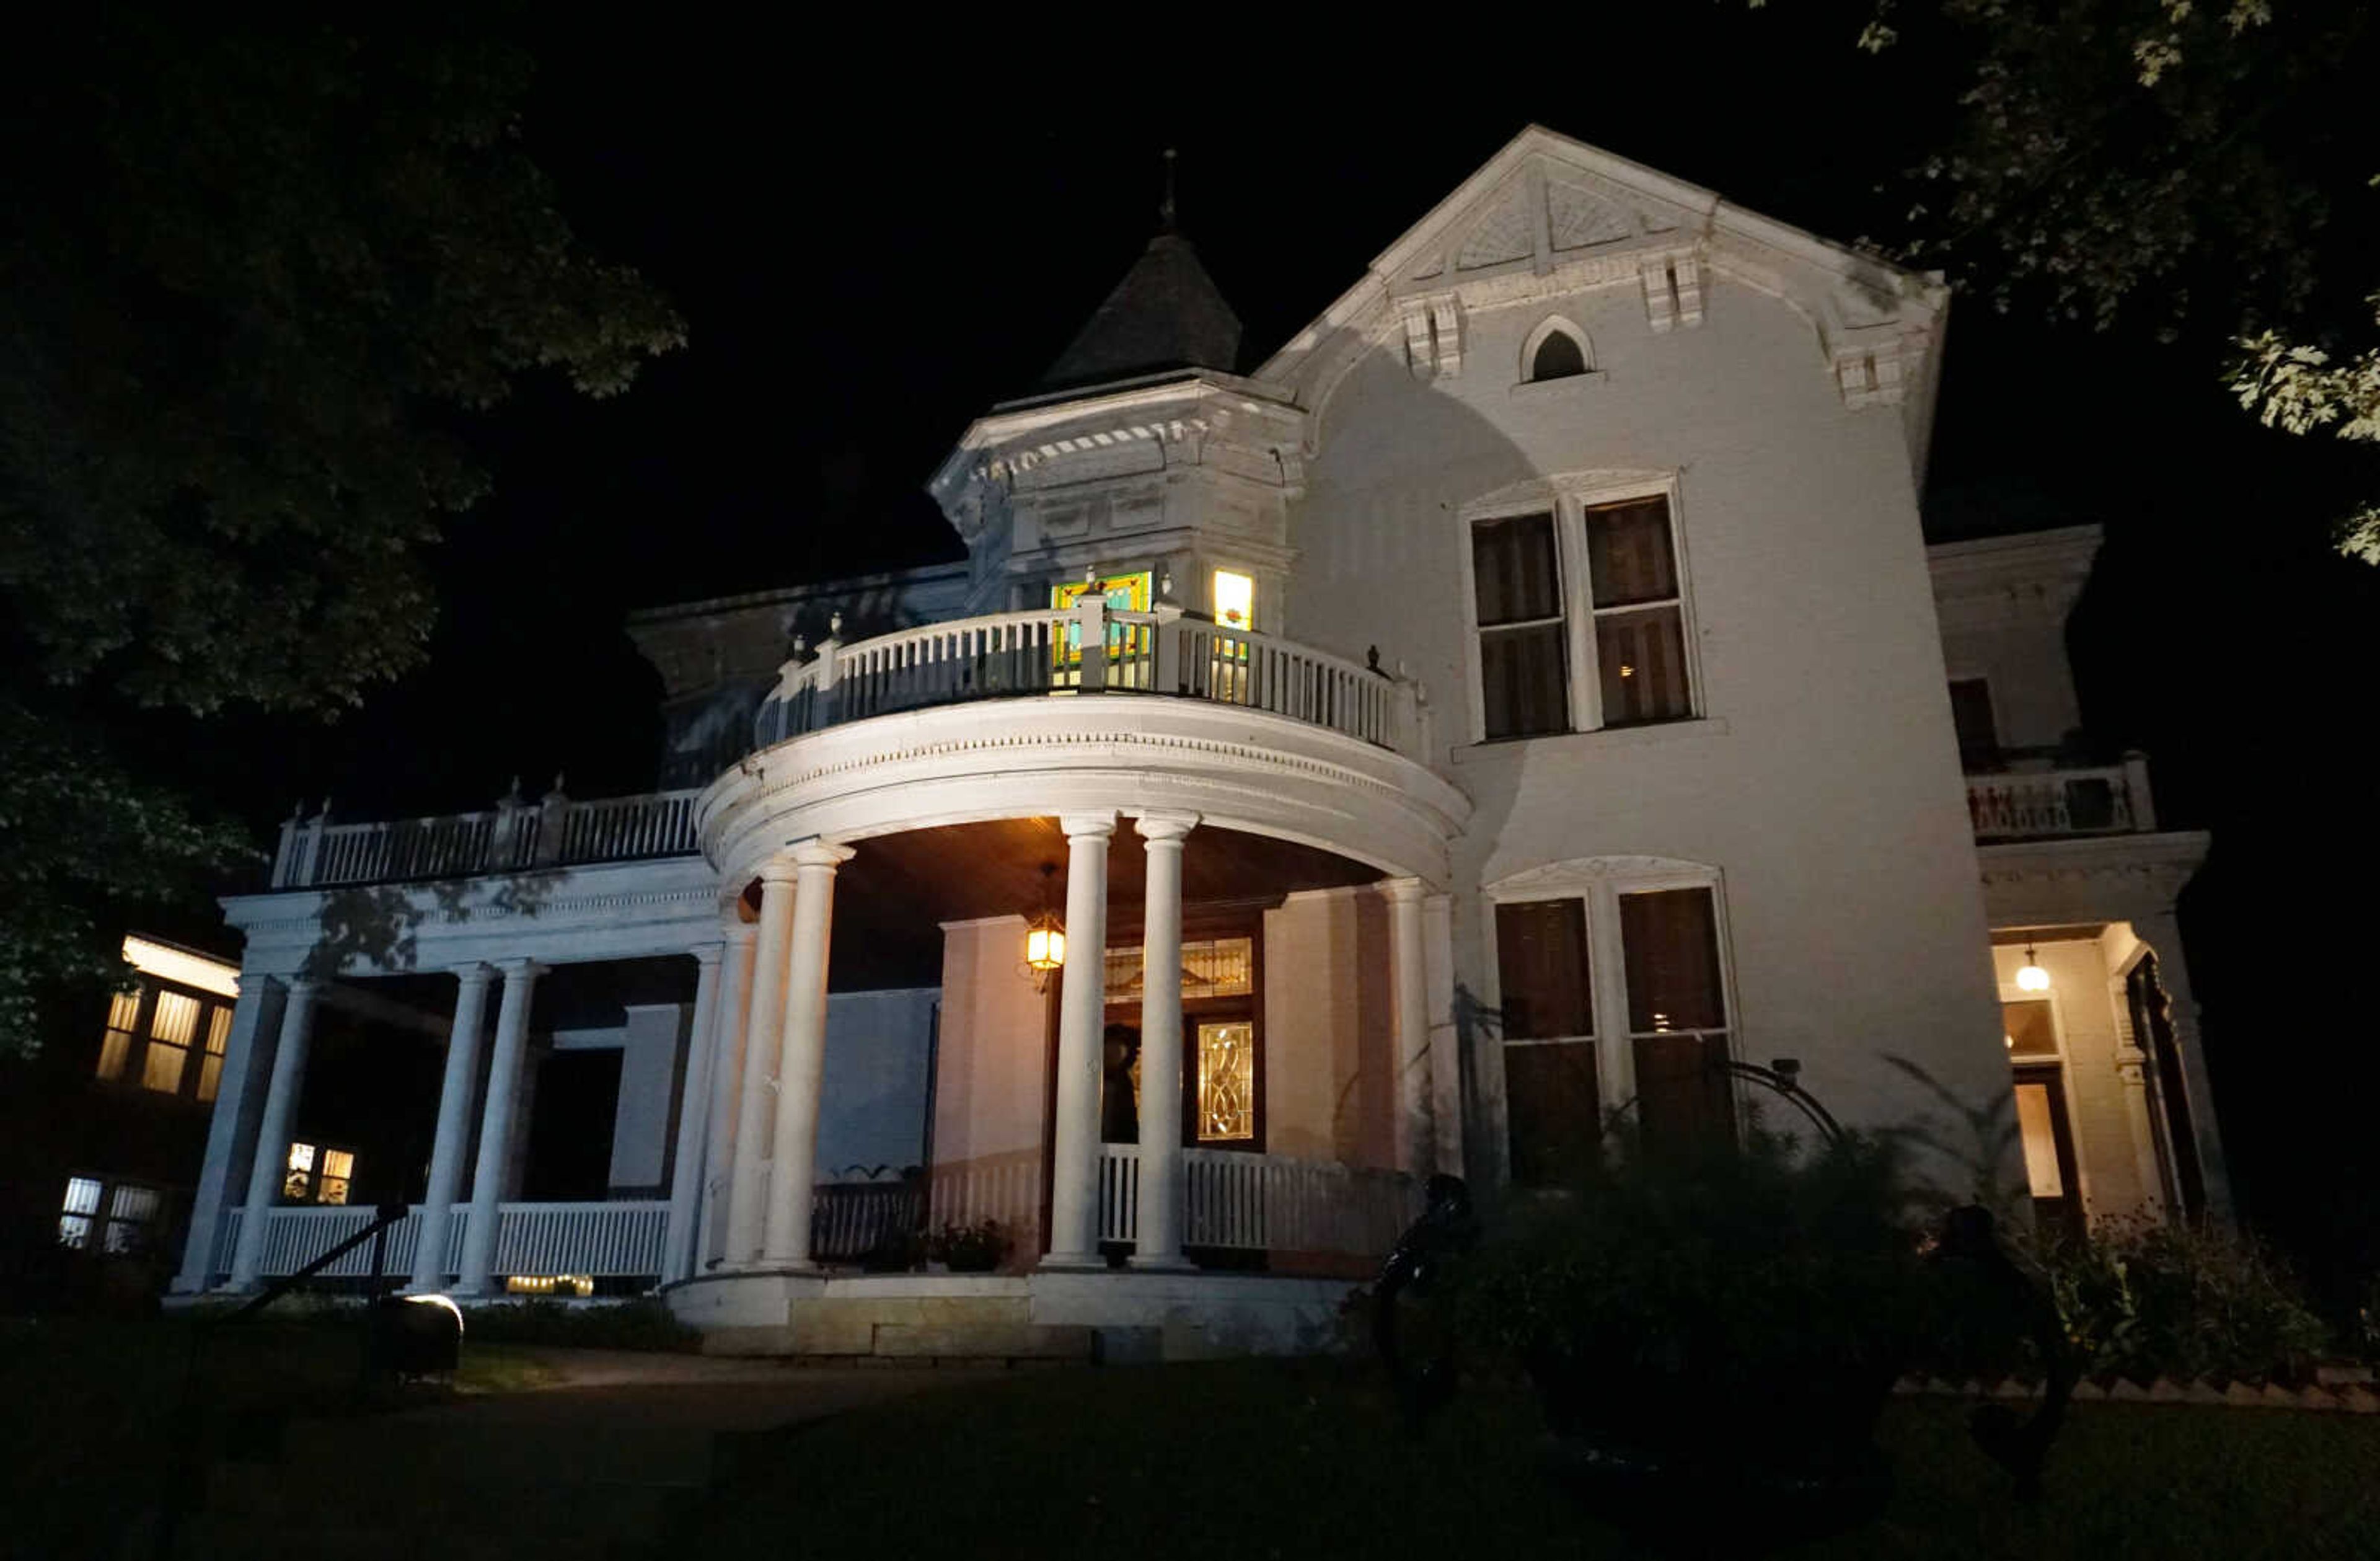 Spooky Southeast stories told at haunted walking tour